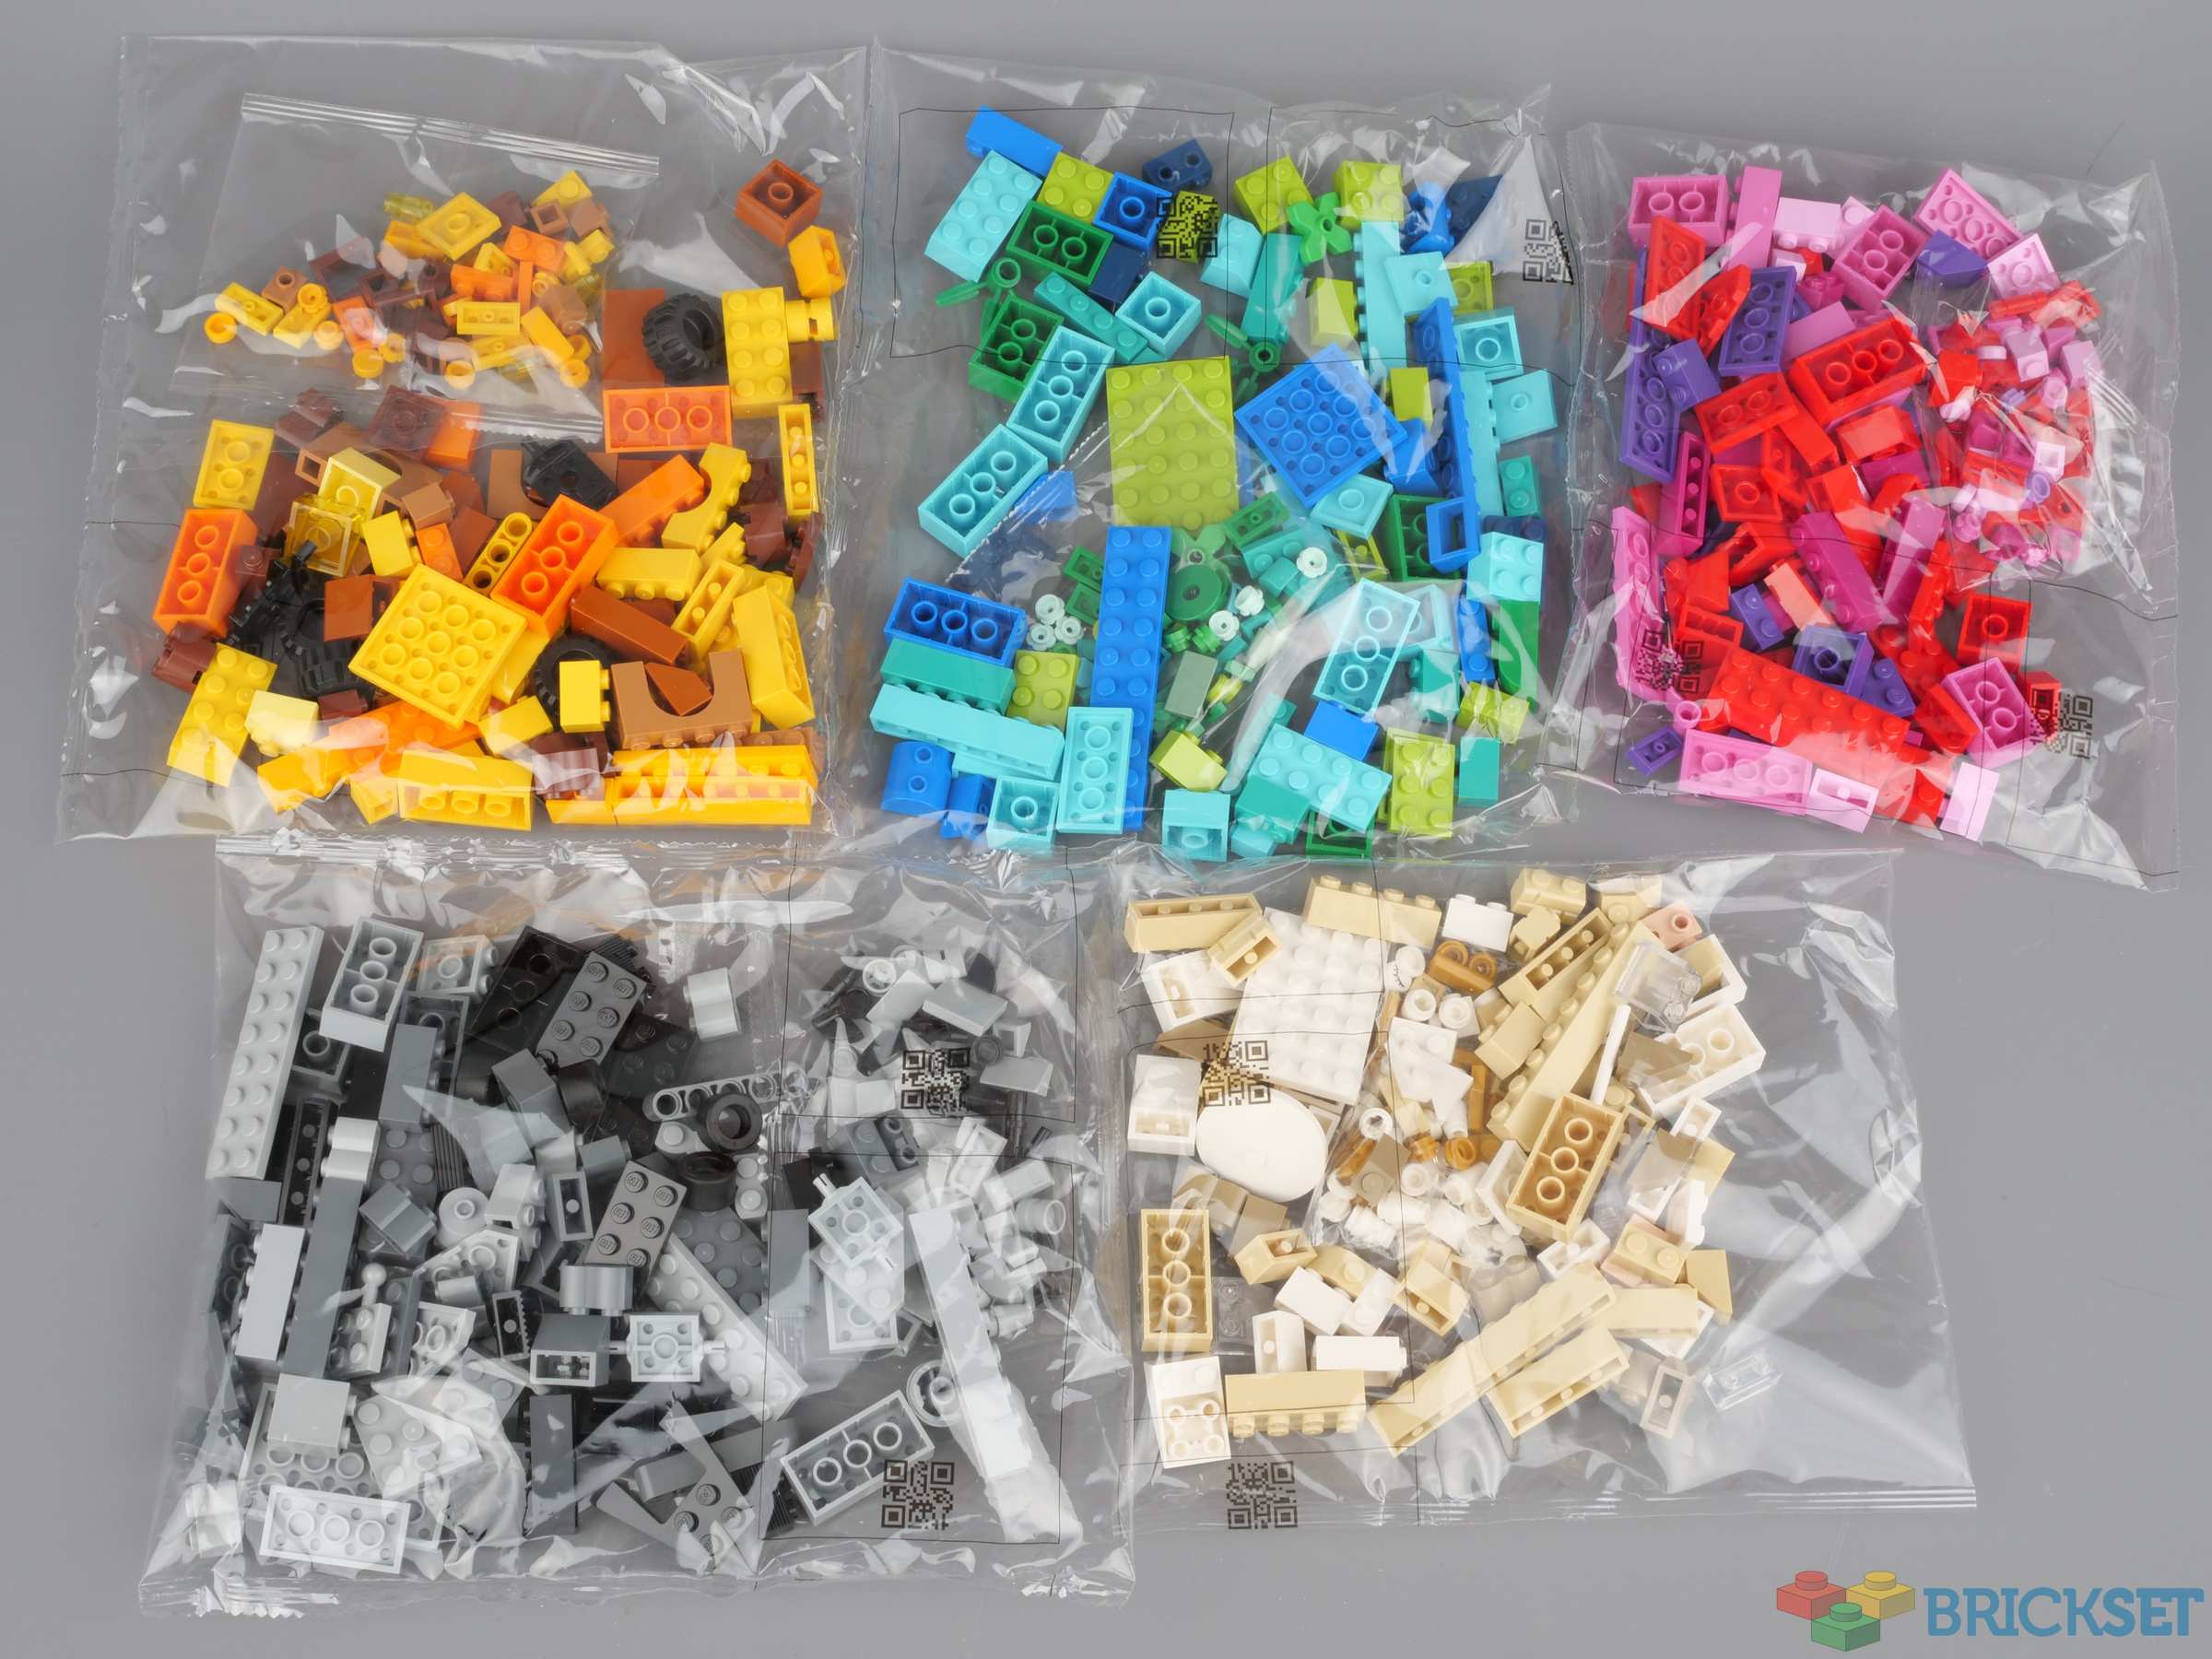 LEGO 11021 90 Years of Play review